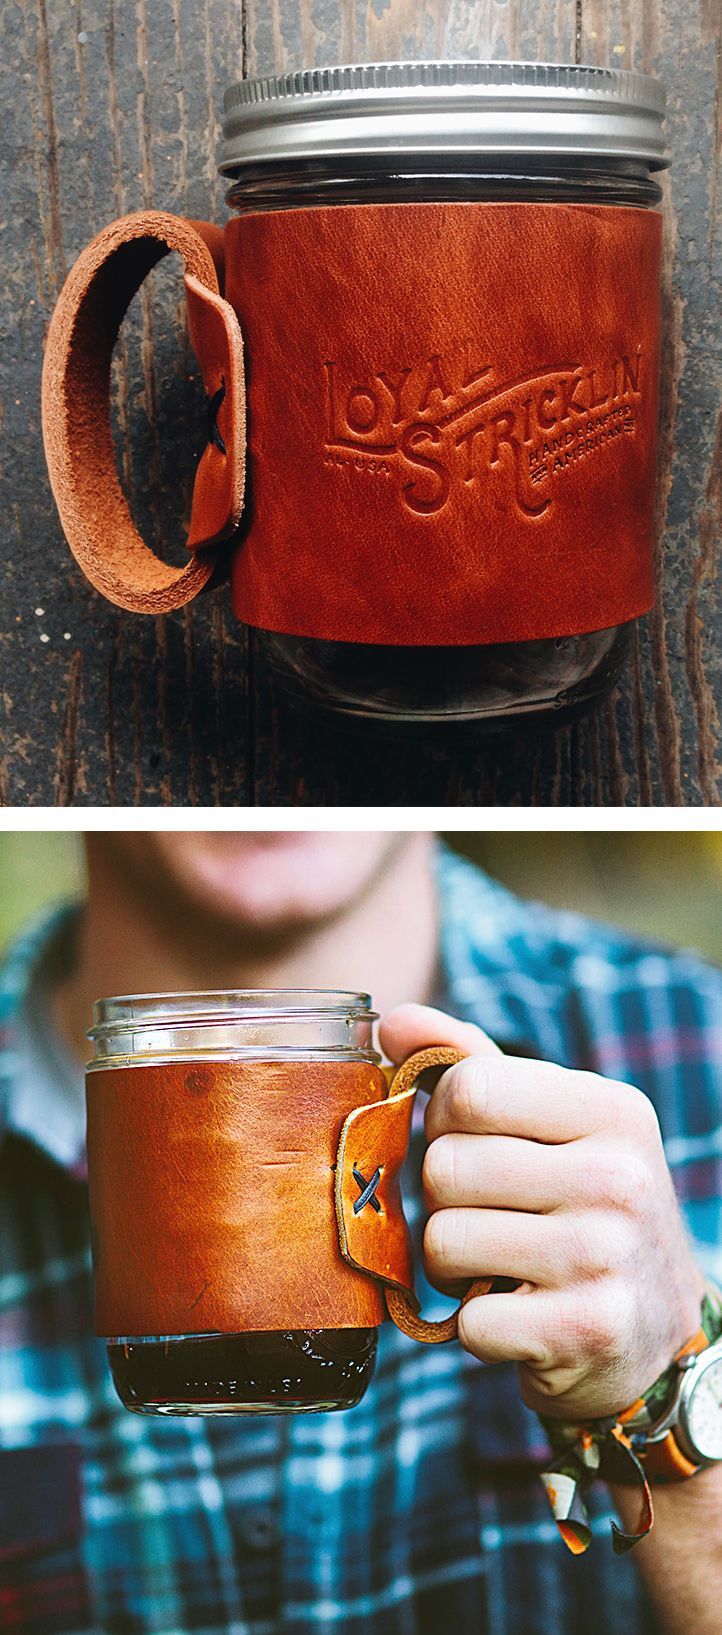 Great idea for the home too. could turn jam jars into take-away mugs if you screw the top back on……